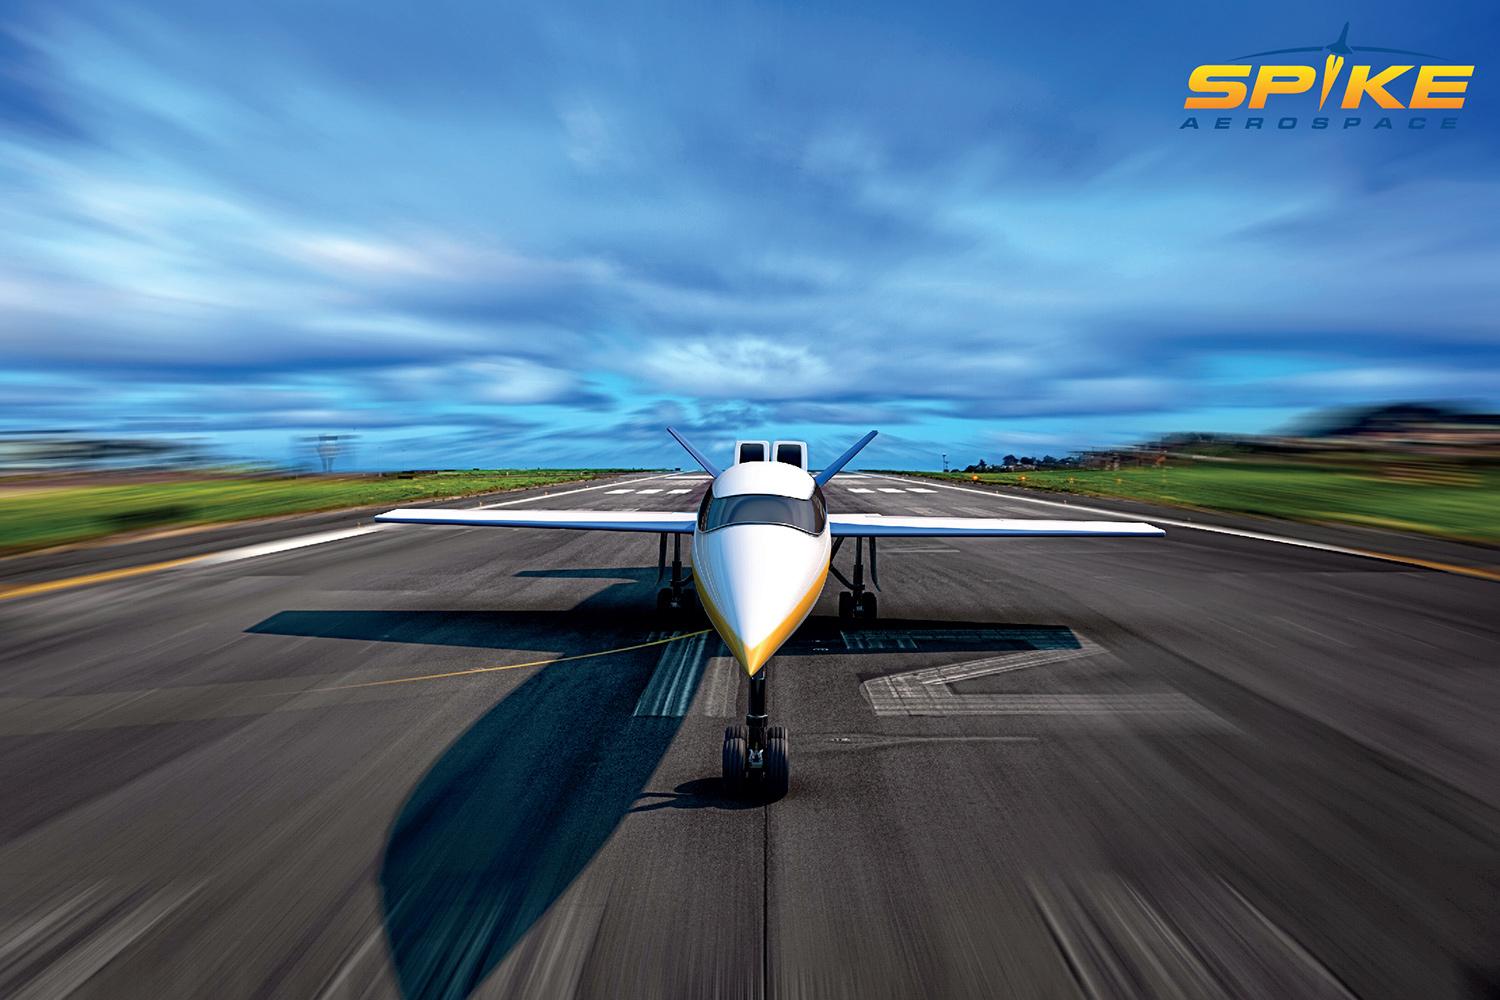 Spike S 512 Supersonic Jet